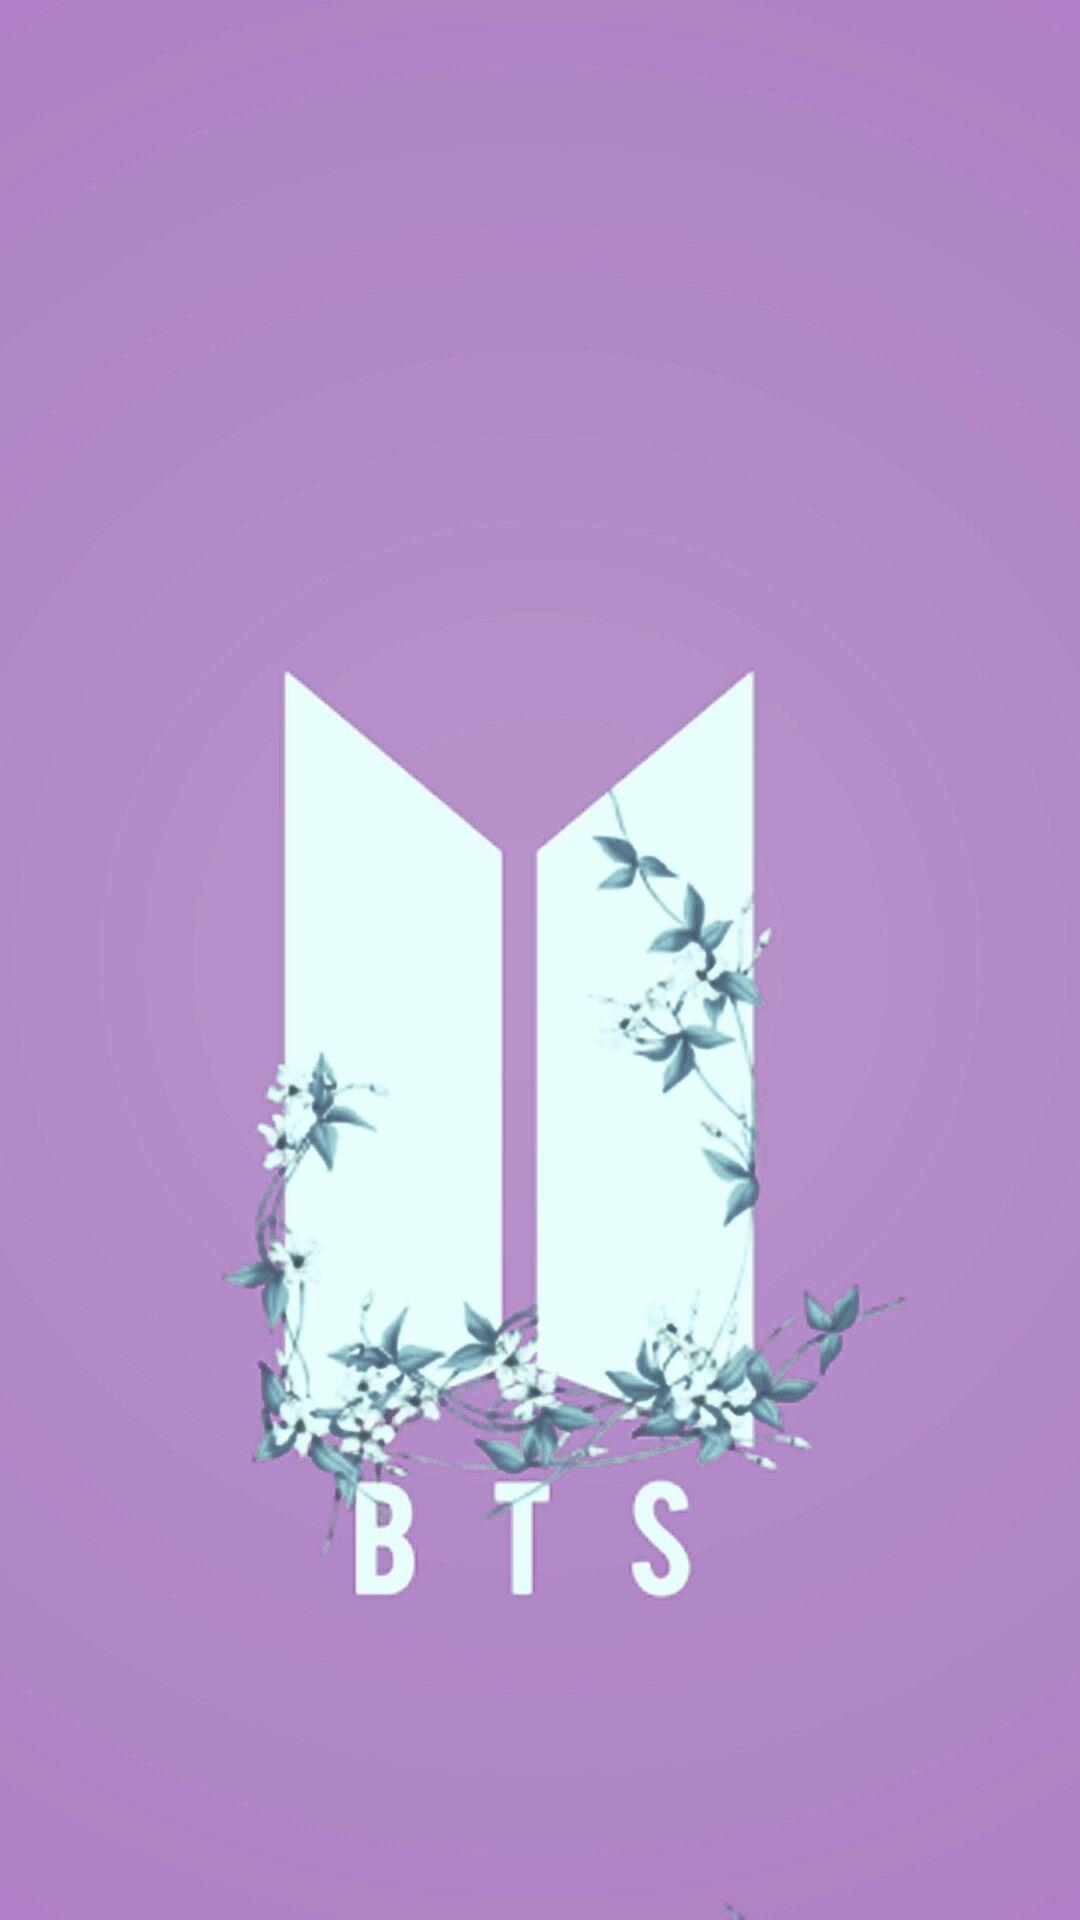 Bts army logo meaning